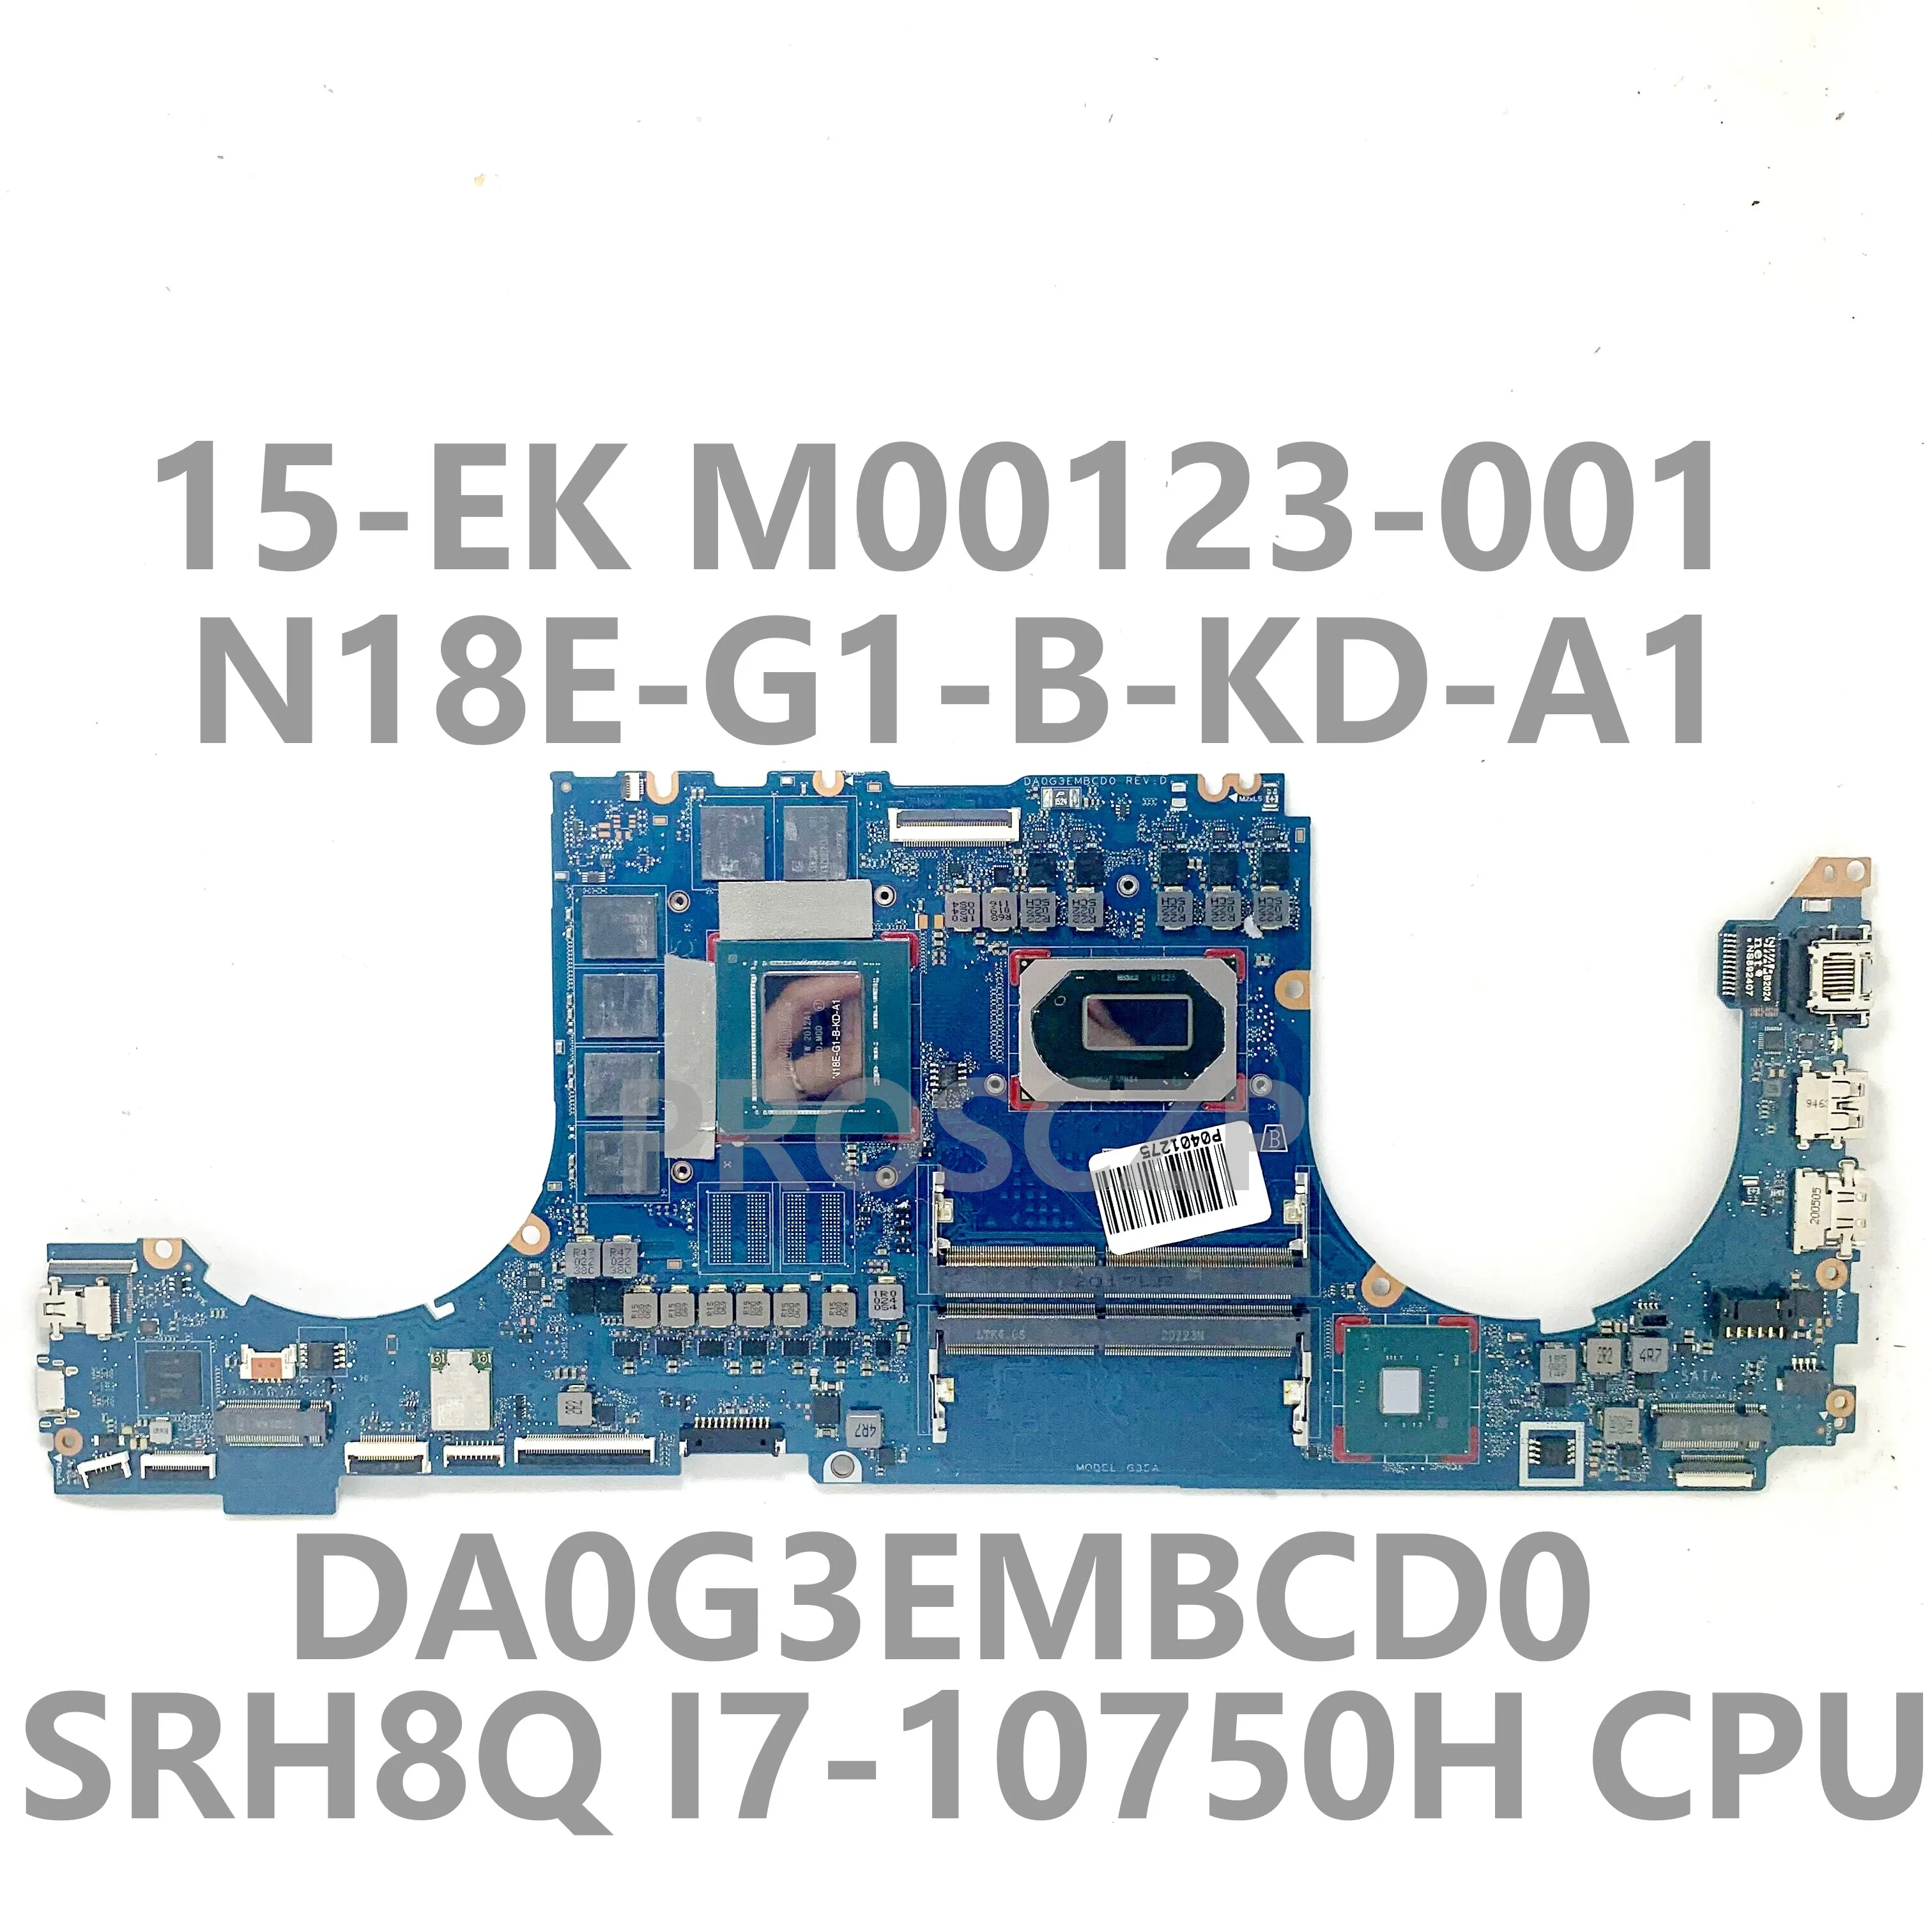 

M00123-001 M00123-501 M00123-601 For HP 15-EK With SRH8Q I7-10750H CPU DA0G3EMBCD0 Laptop Motherboard N18E-G1-B-KD-A1 100%Tested